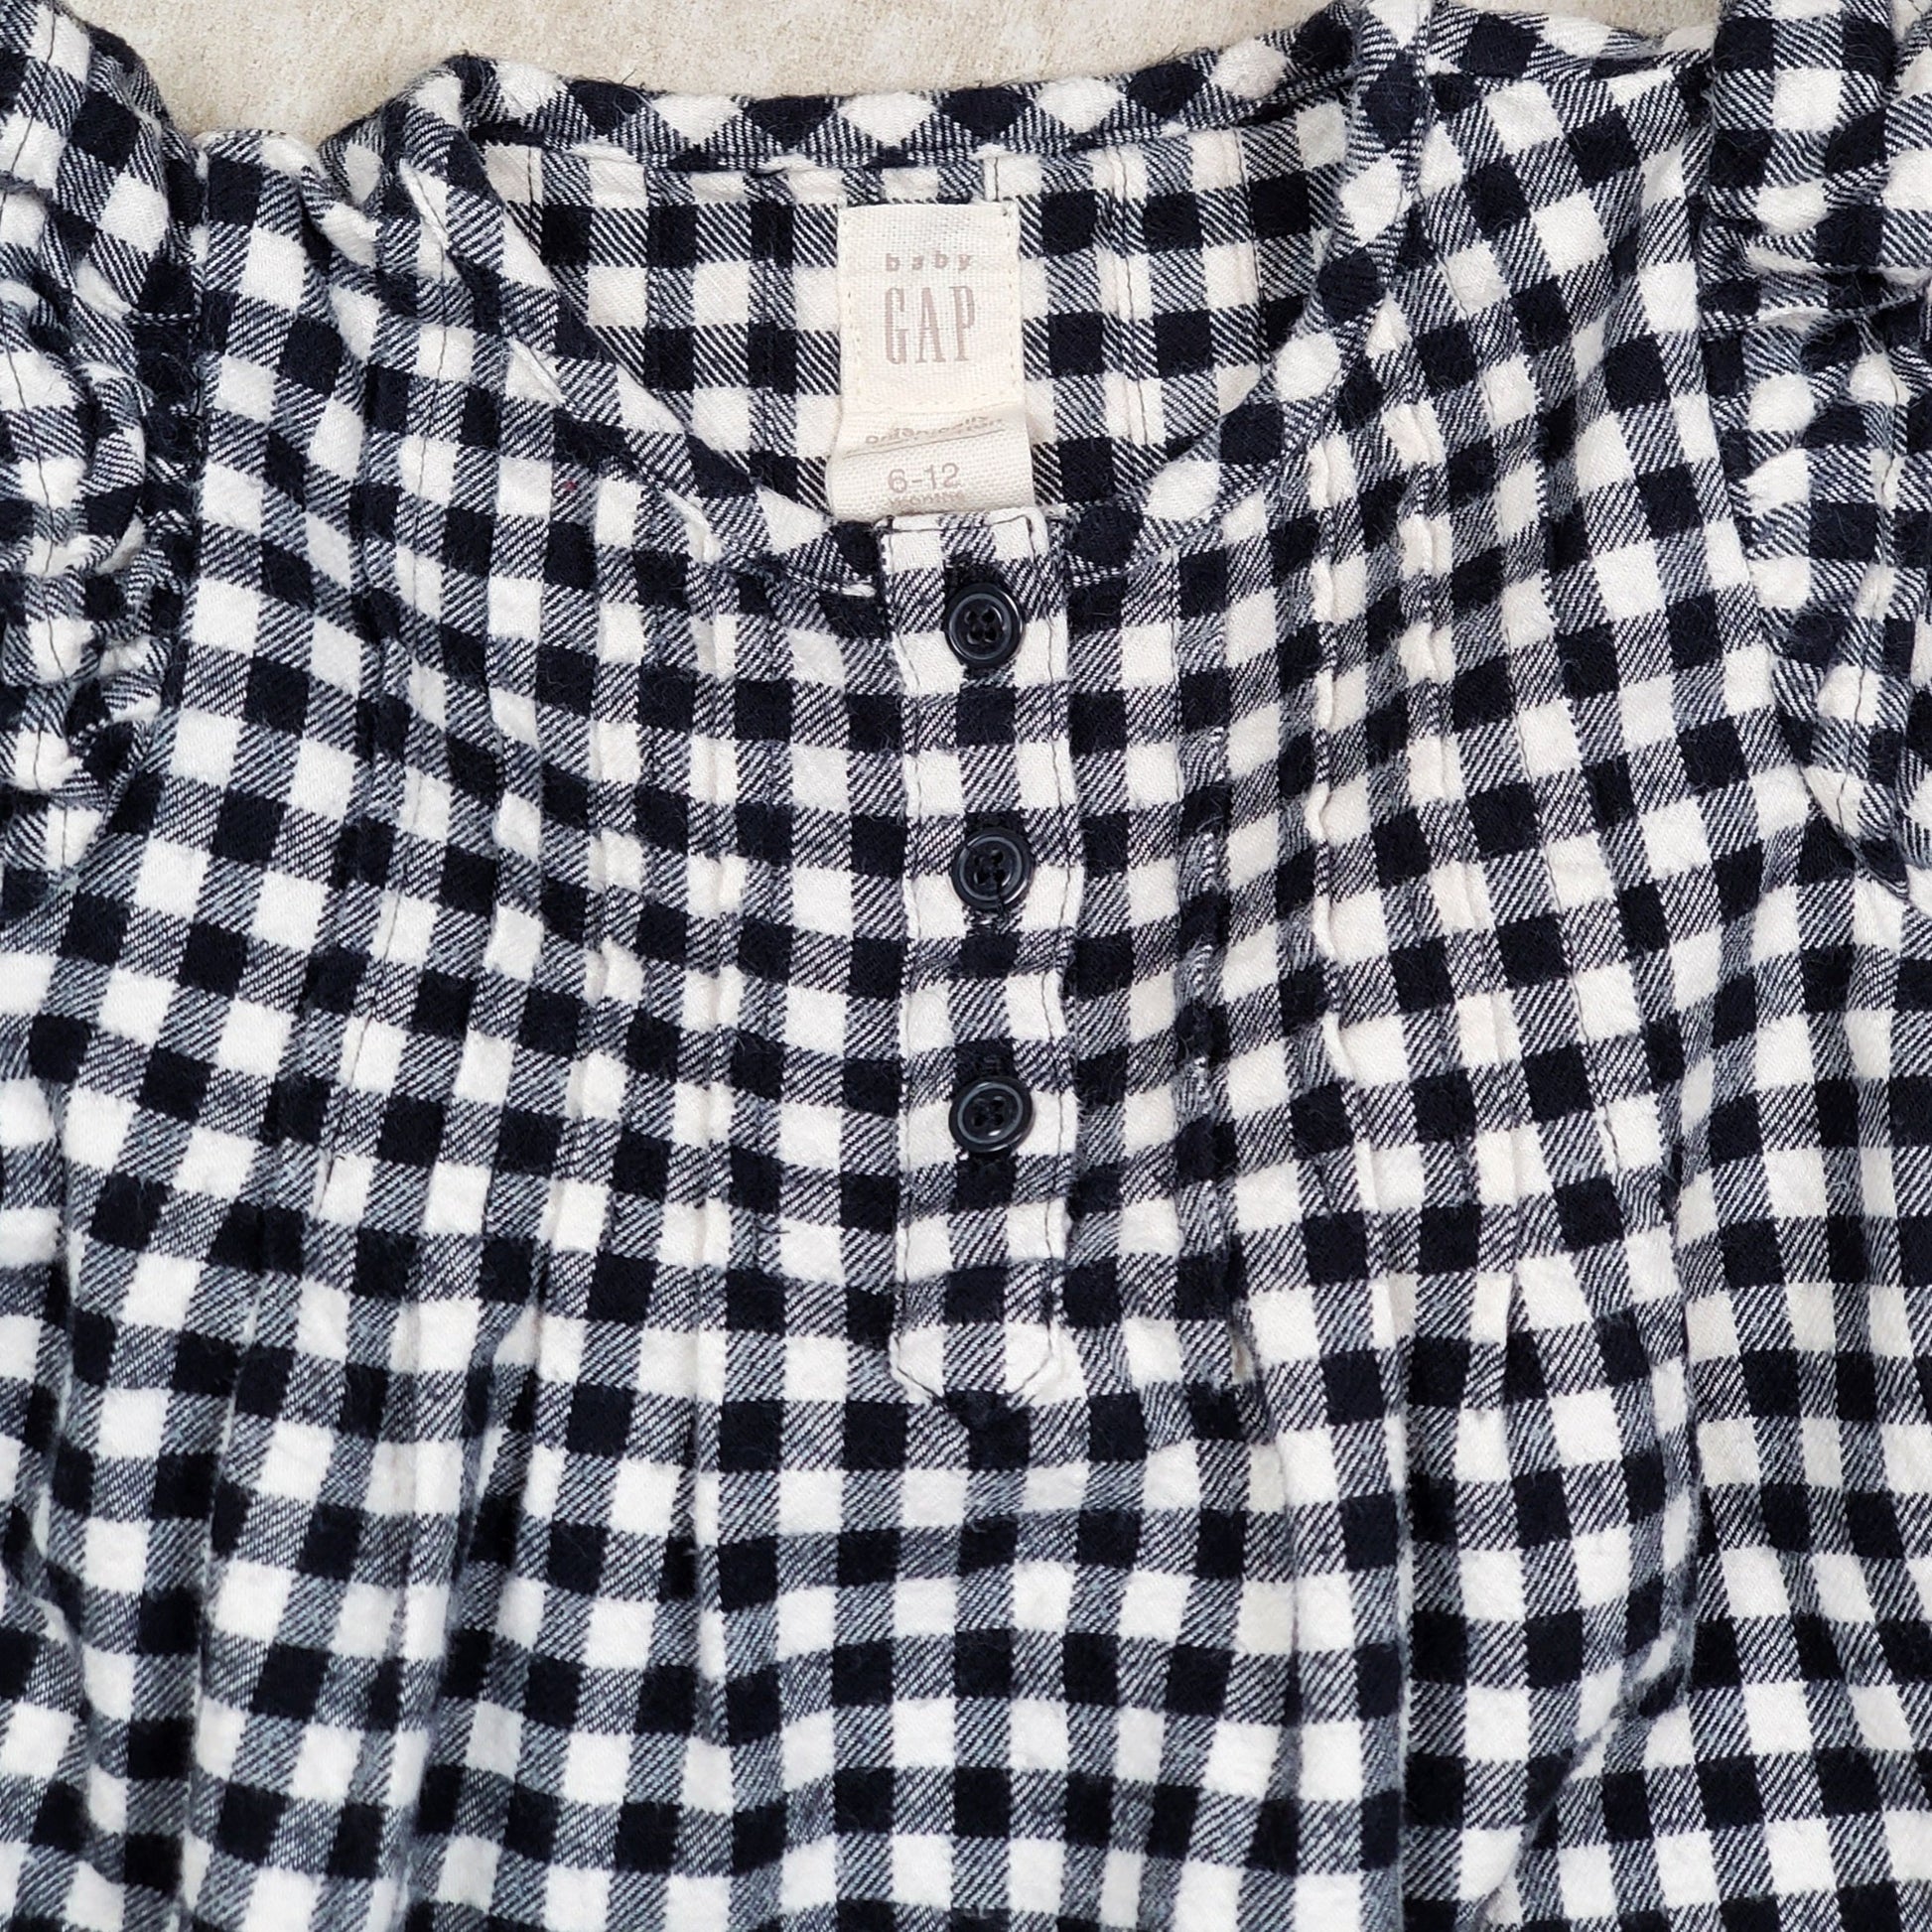 Baby Gap Girls Black White Plaid Flannel Top Size 6M Used, close-up